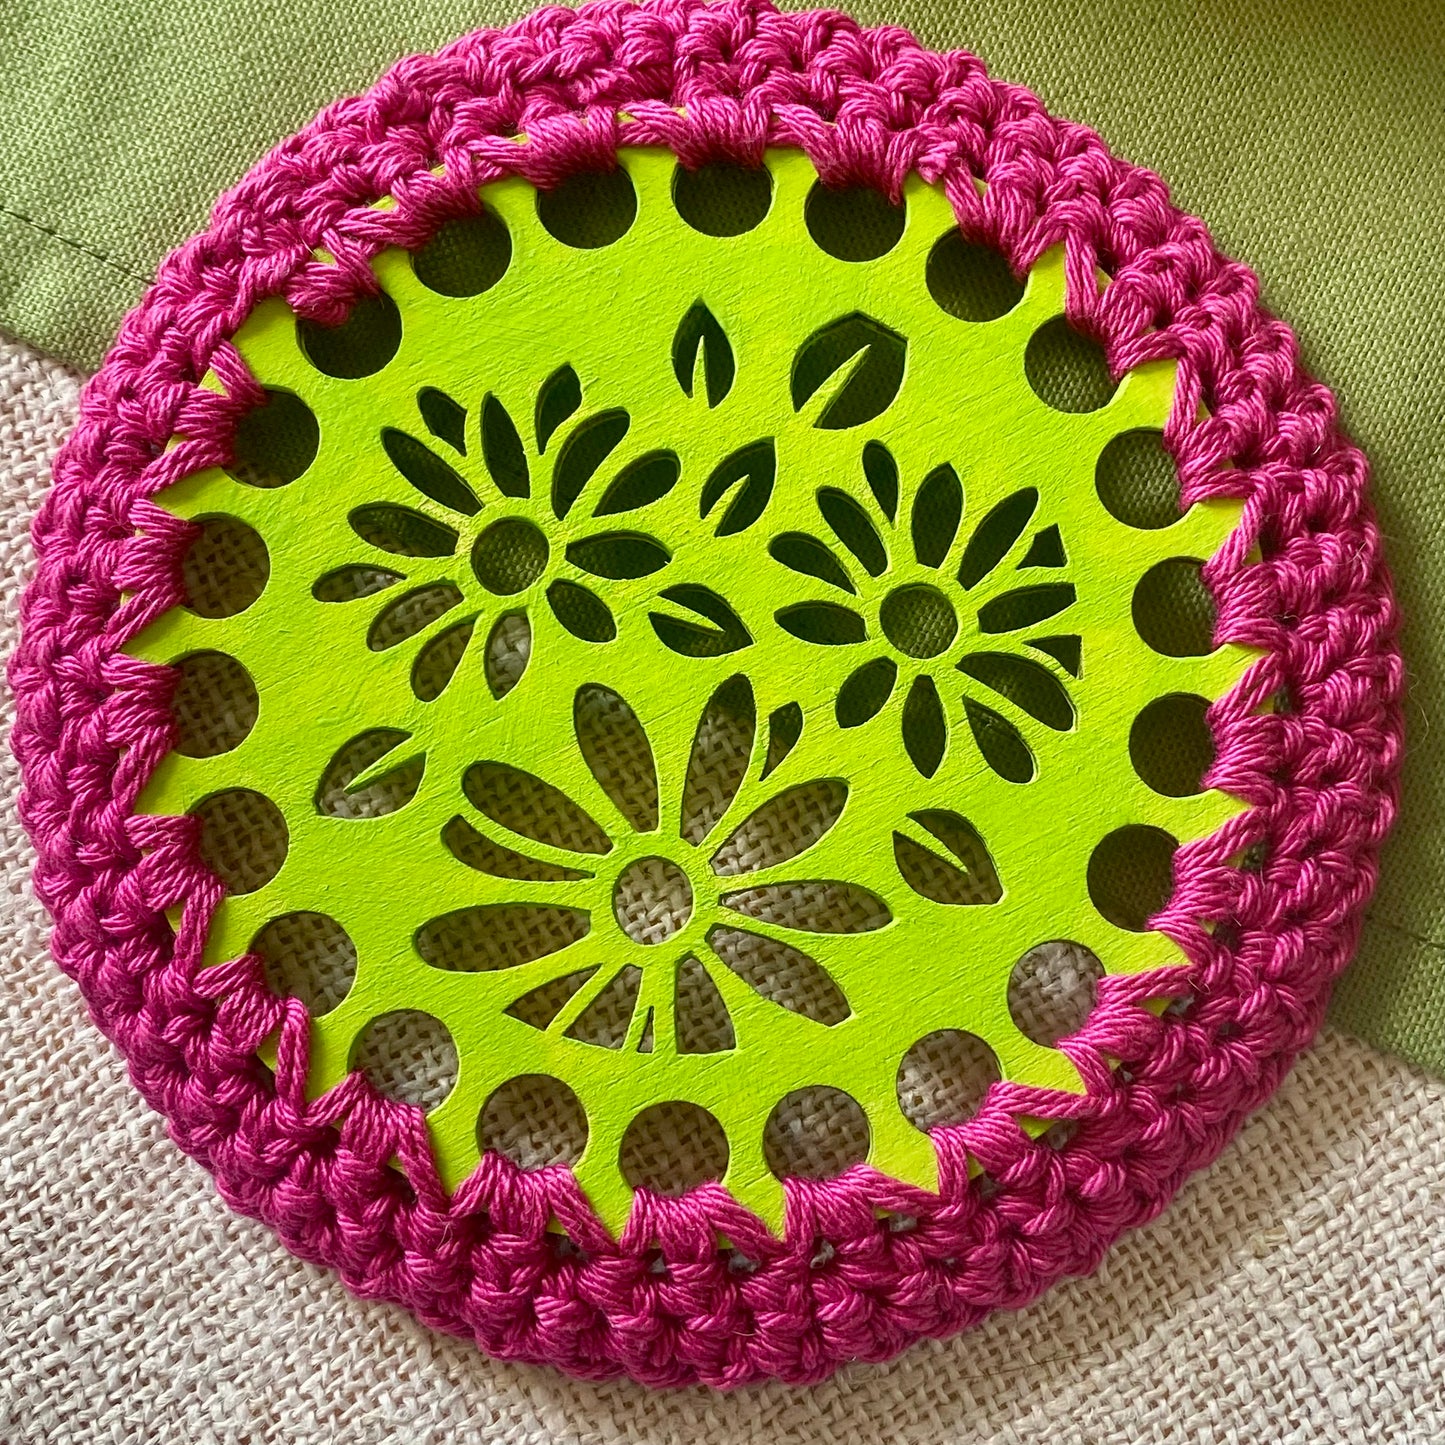 Retro Wooden Coasters with Flowers - Flower Drink Crochet Coasters - Boho Coasters - Set of Four Coasters